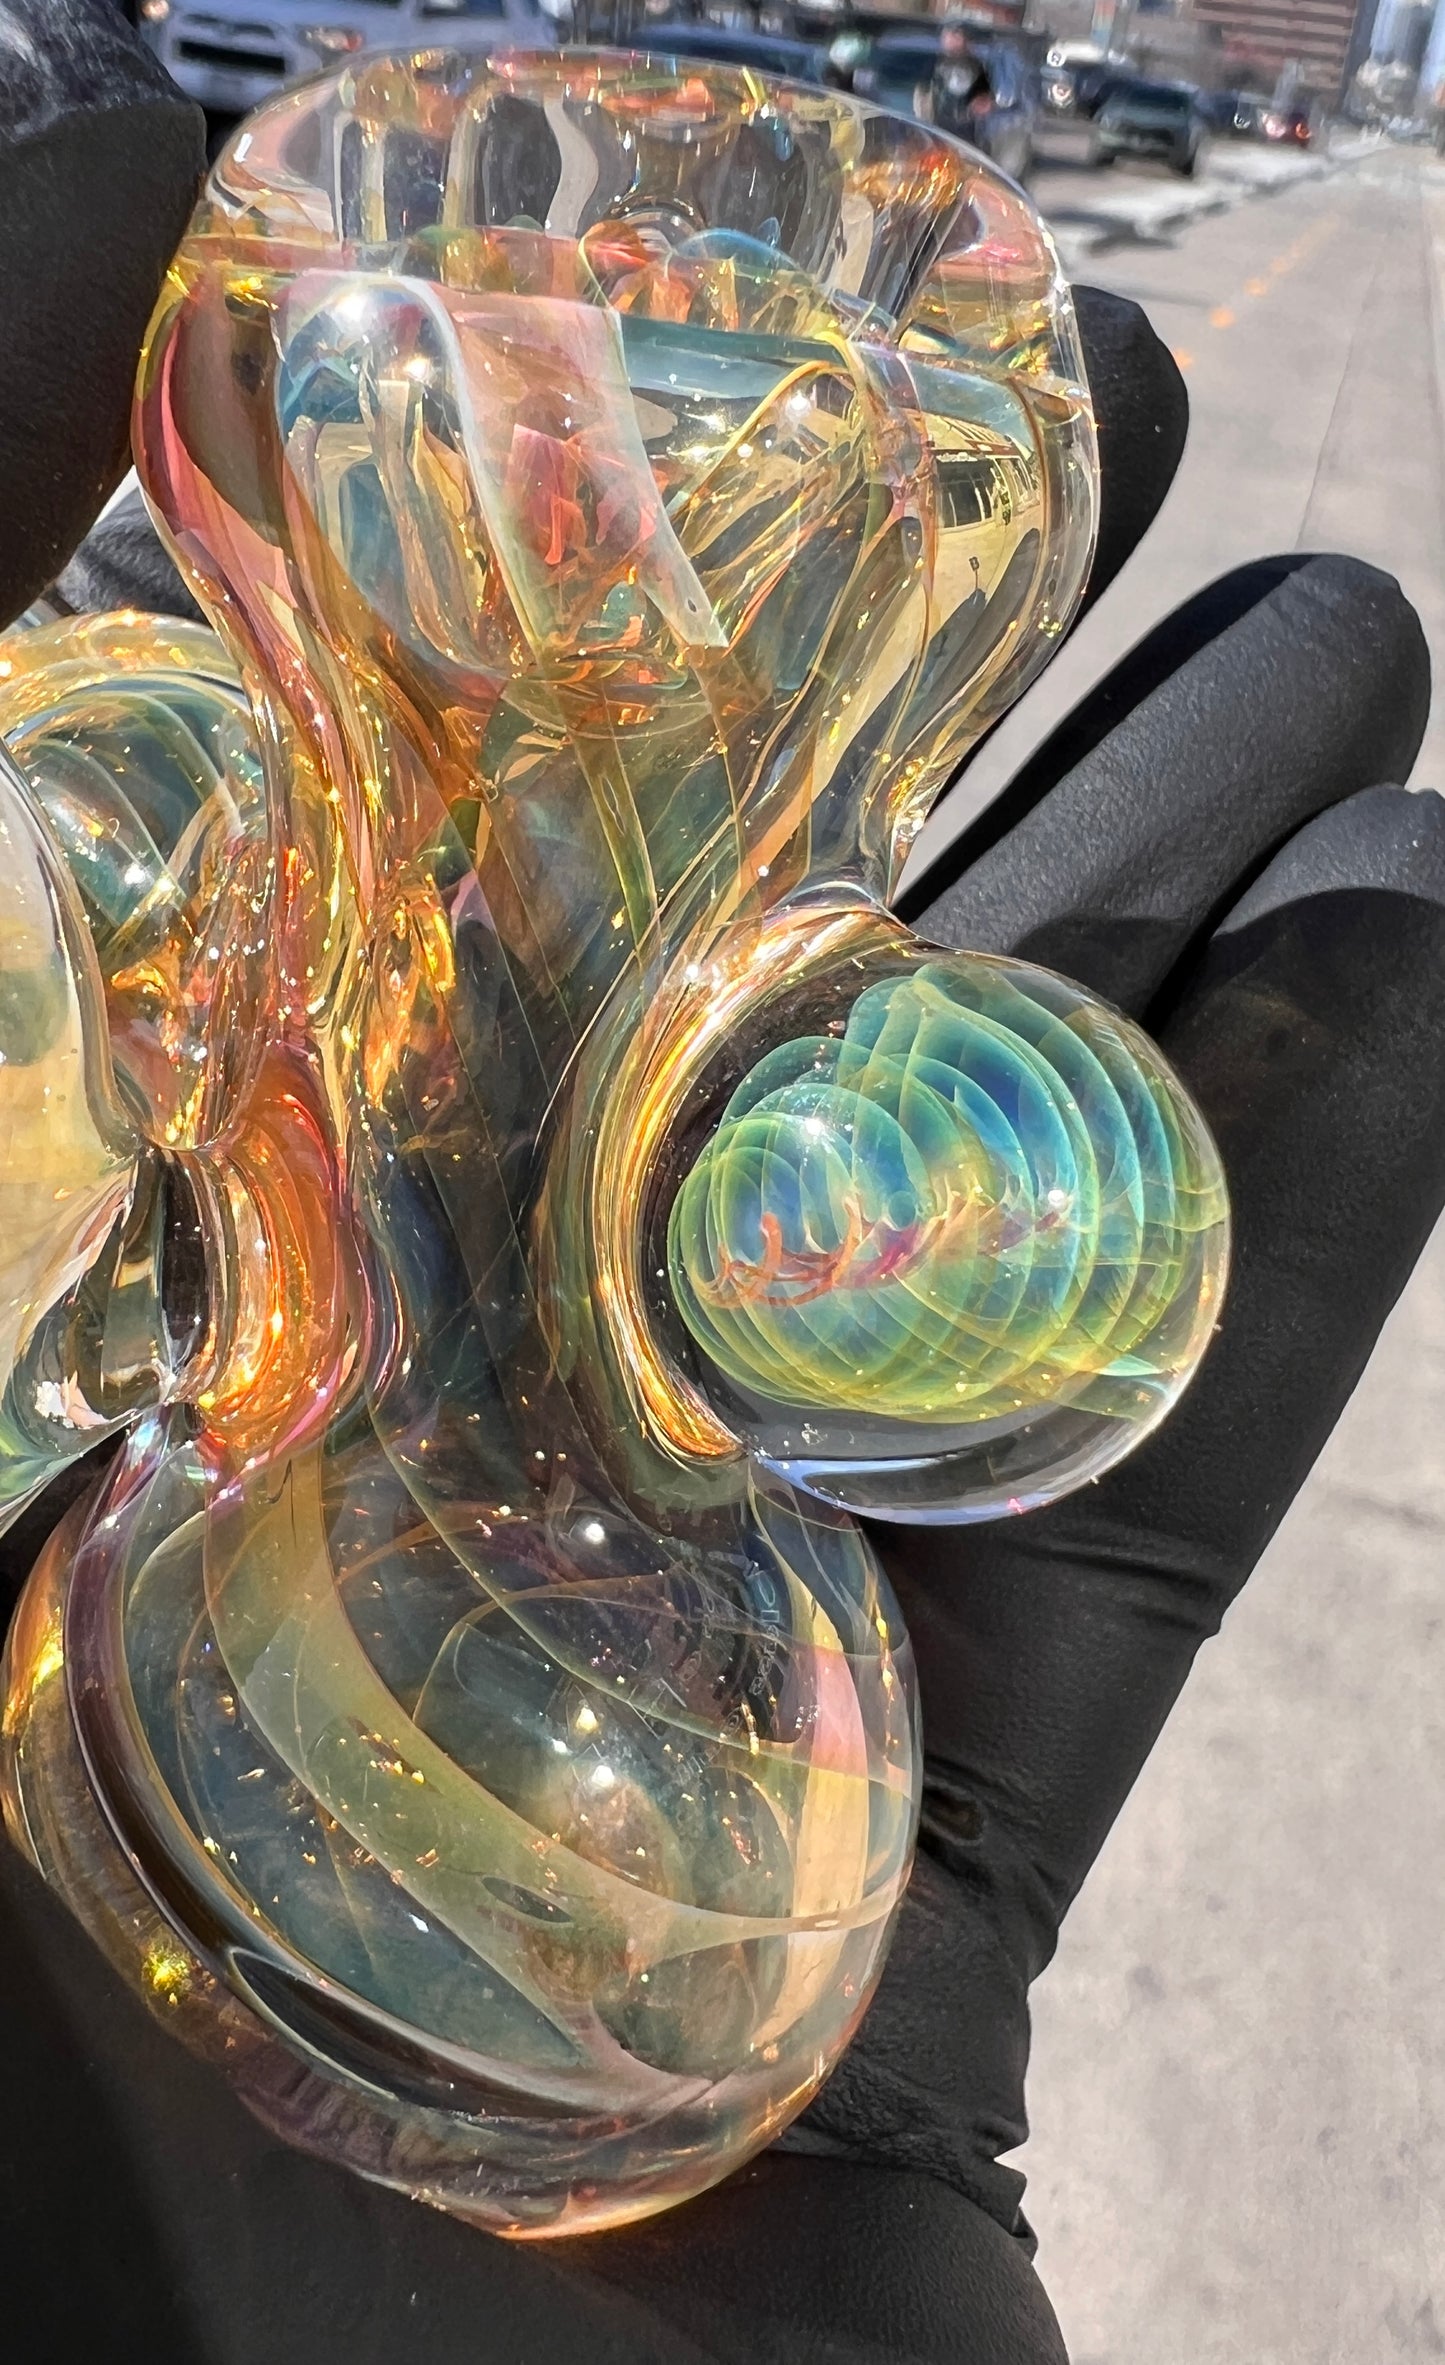 Fumed Hammer with Mibs by Simon (Sigh Glass)